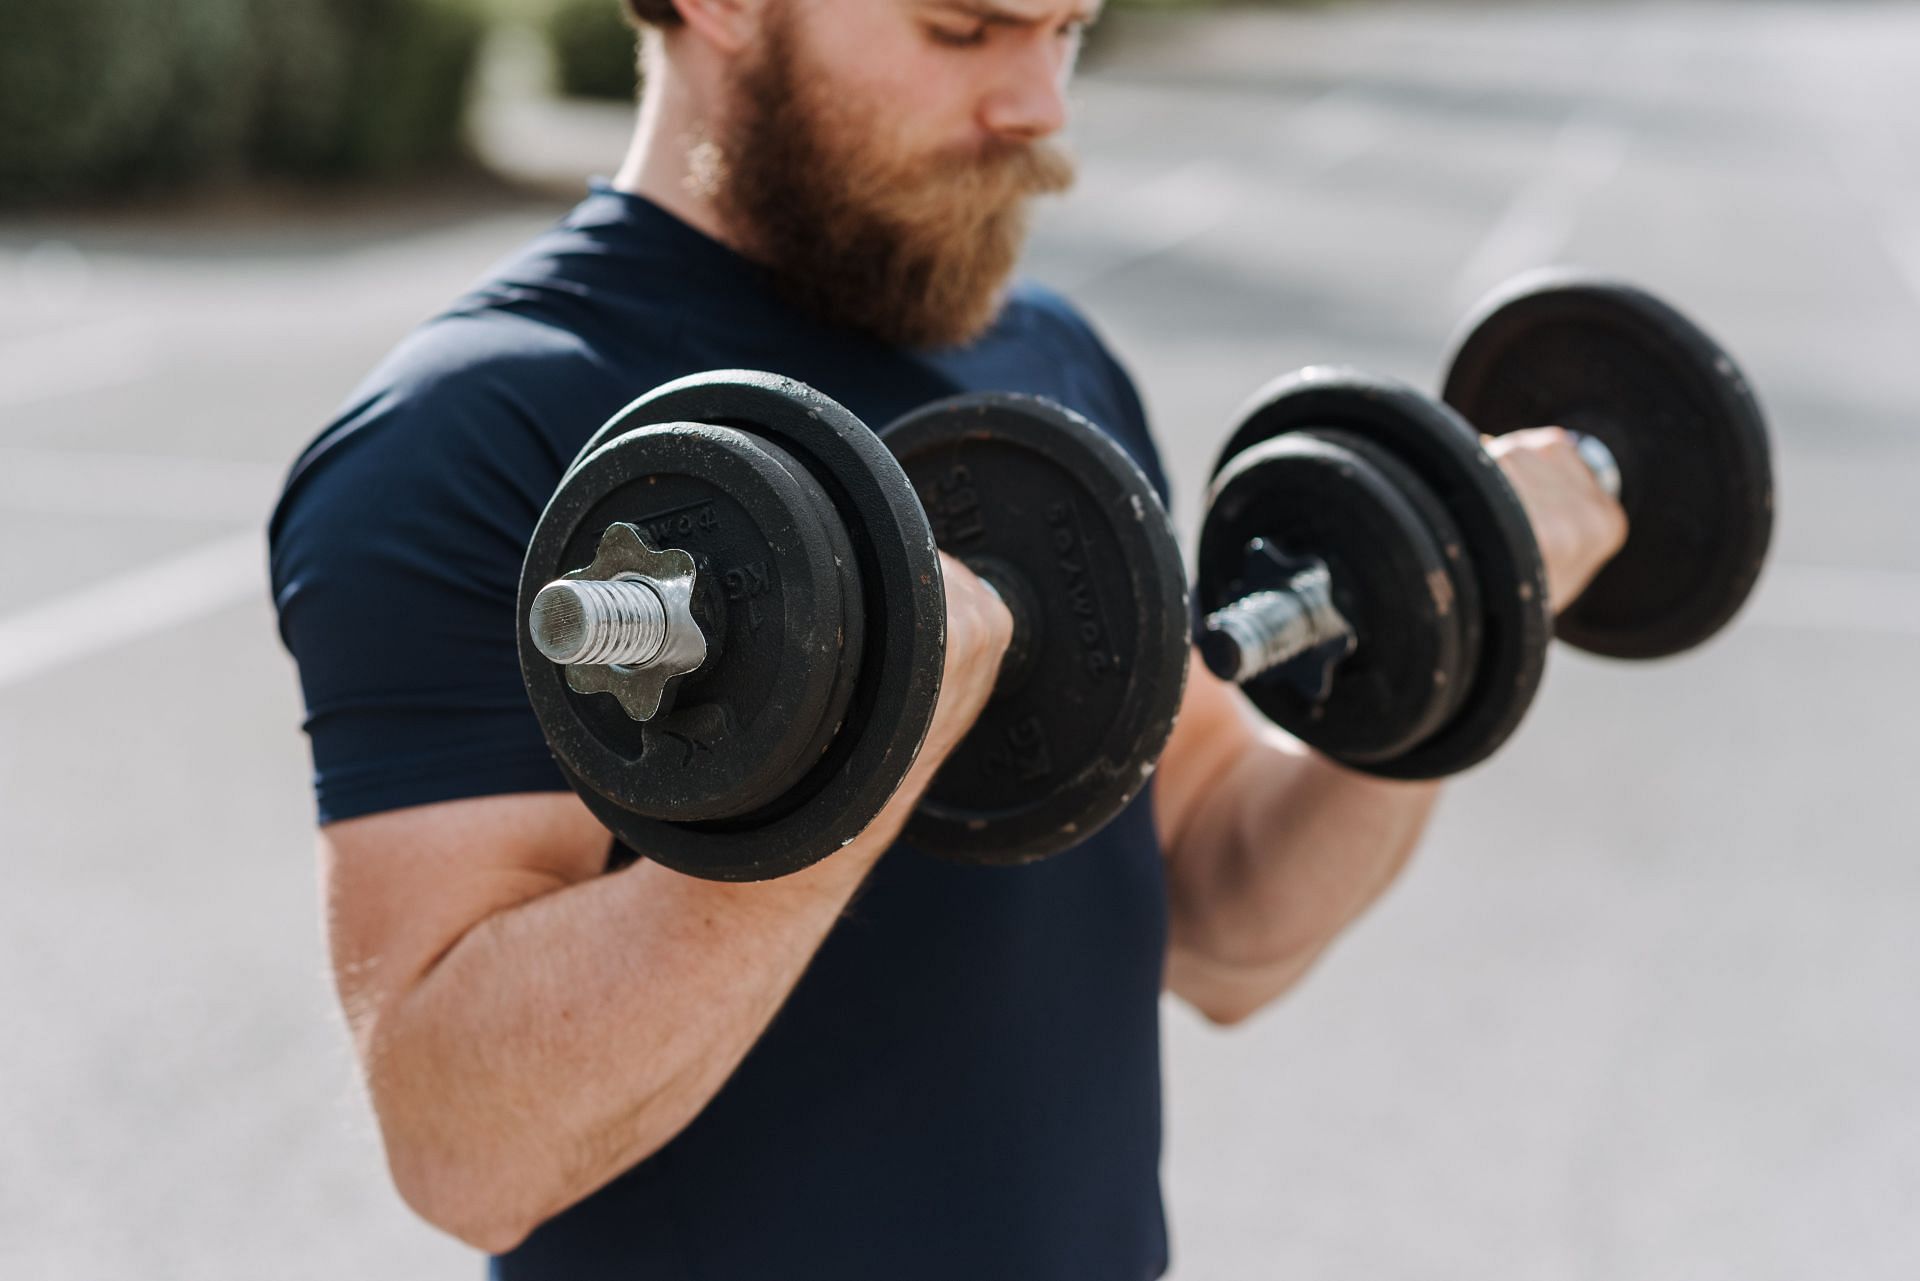 Bicep curls is one of the best bicep exercises you can do. (Image via Pexels/Anete Lusina)